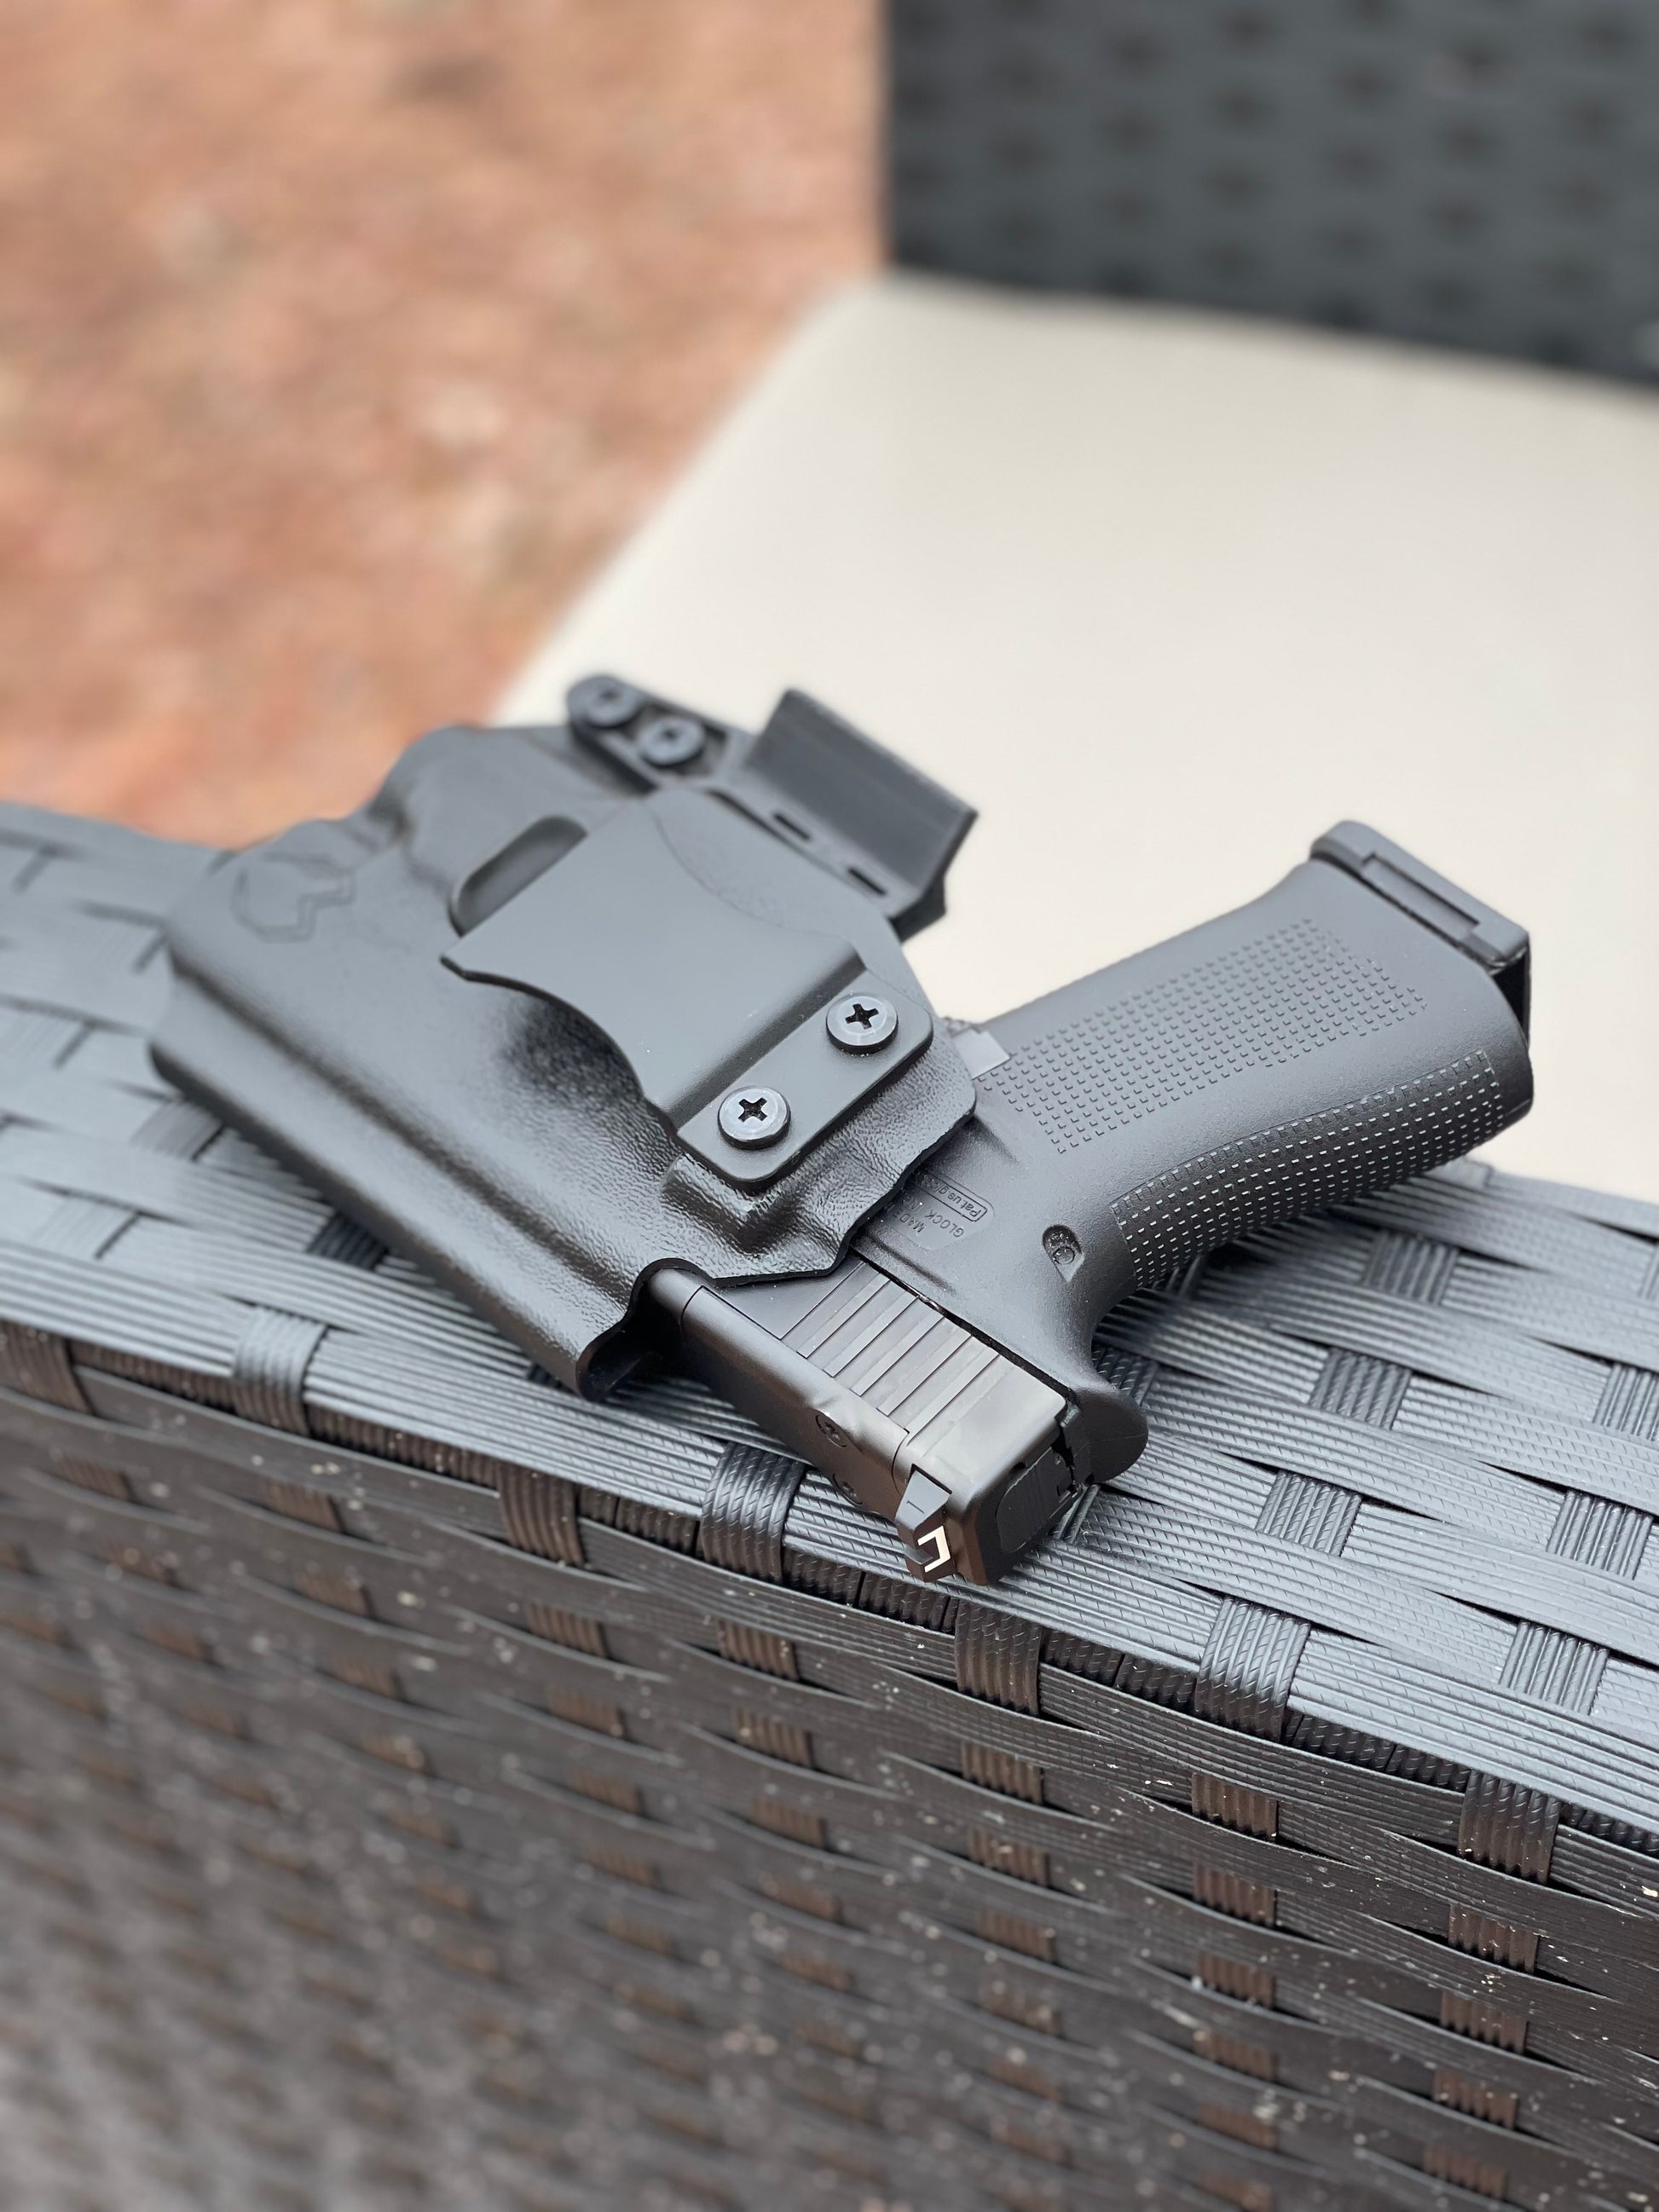 Custom-molded Kydex holster with RMR cut, compatible with popular reflex sights.